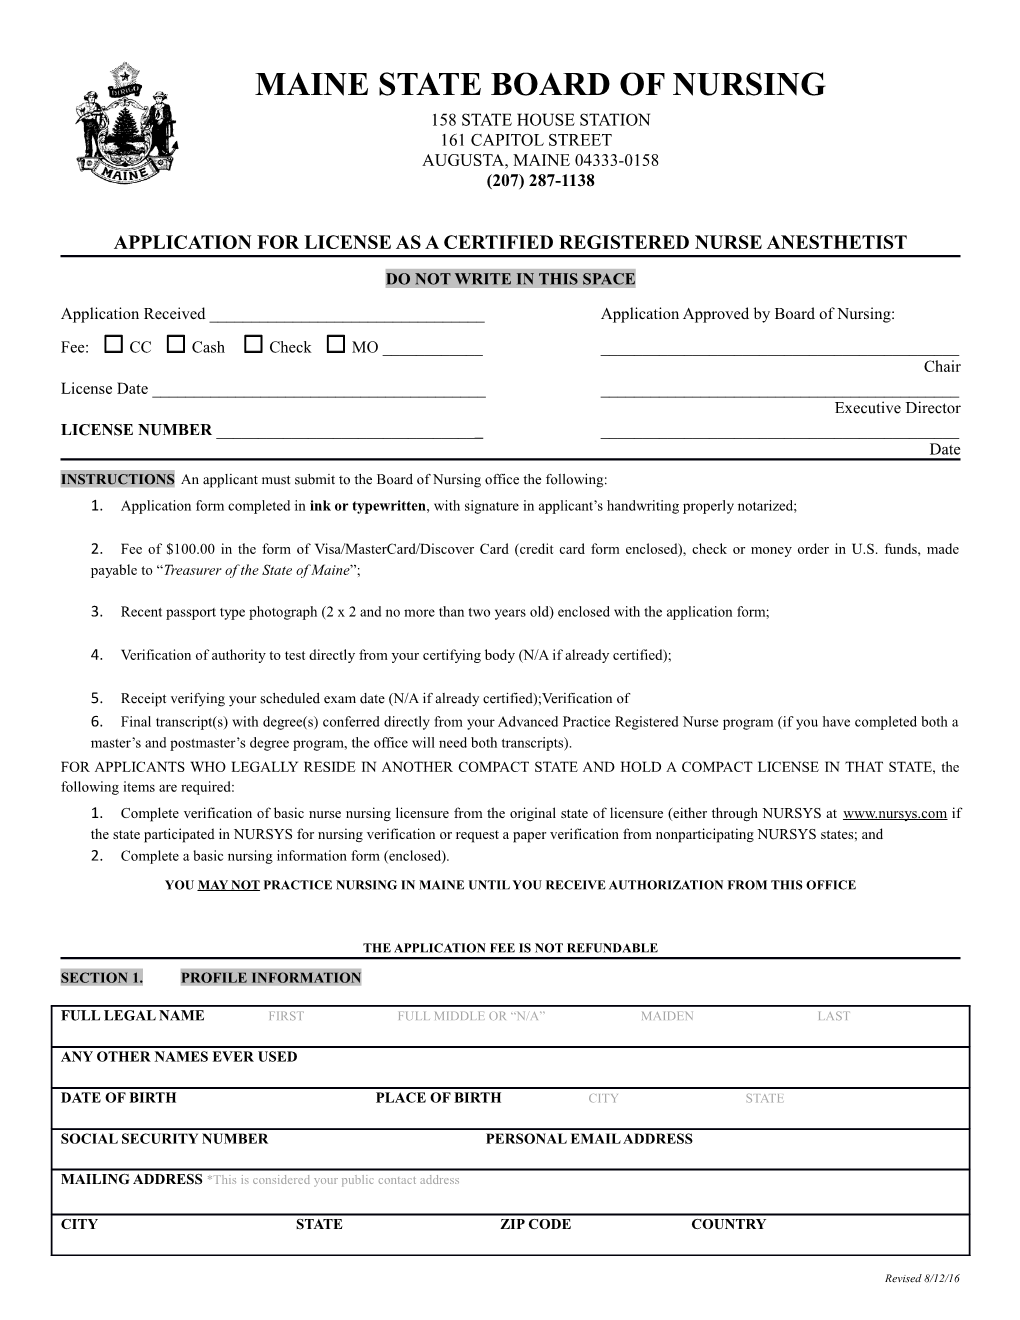 Application for License As a Certified Registered Nurse Anesthetist